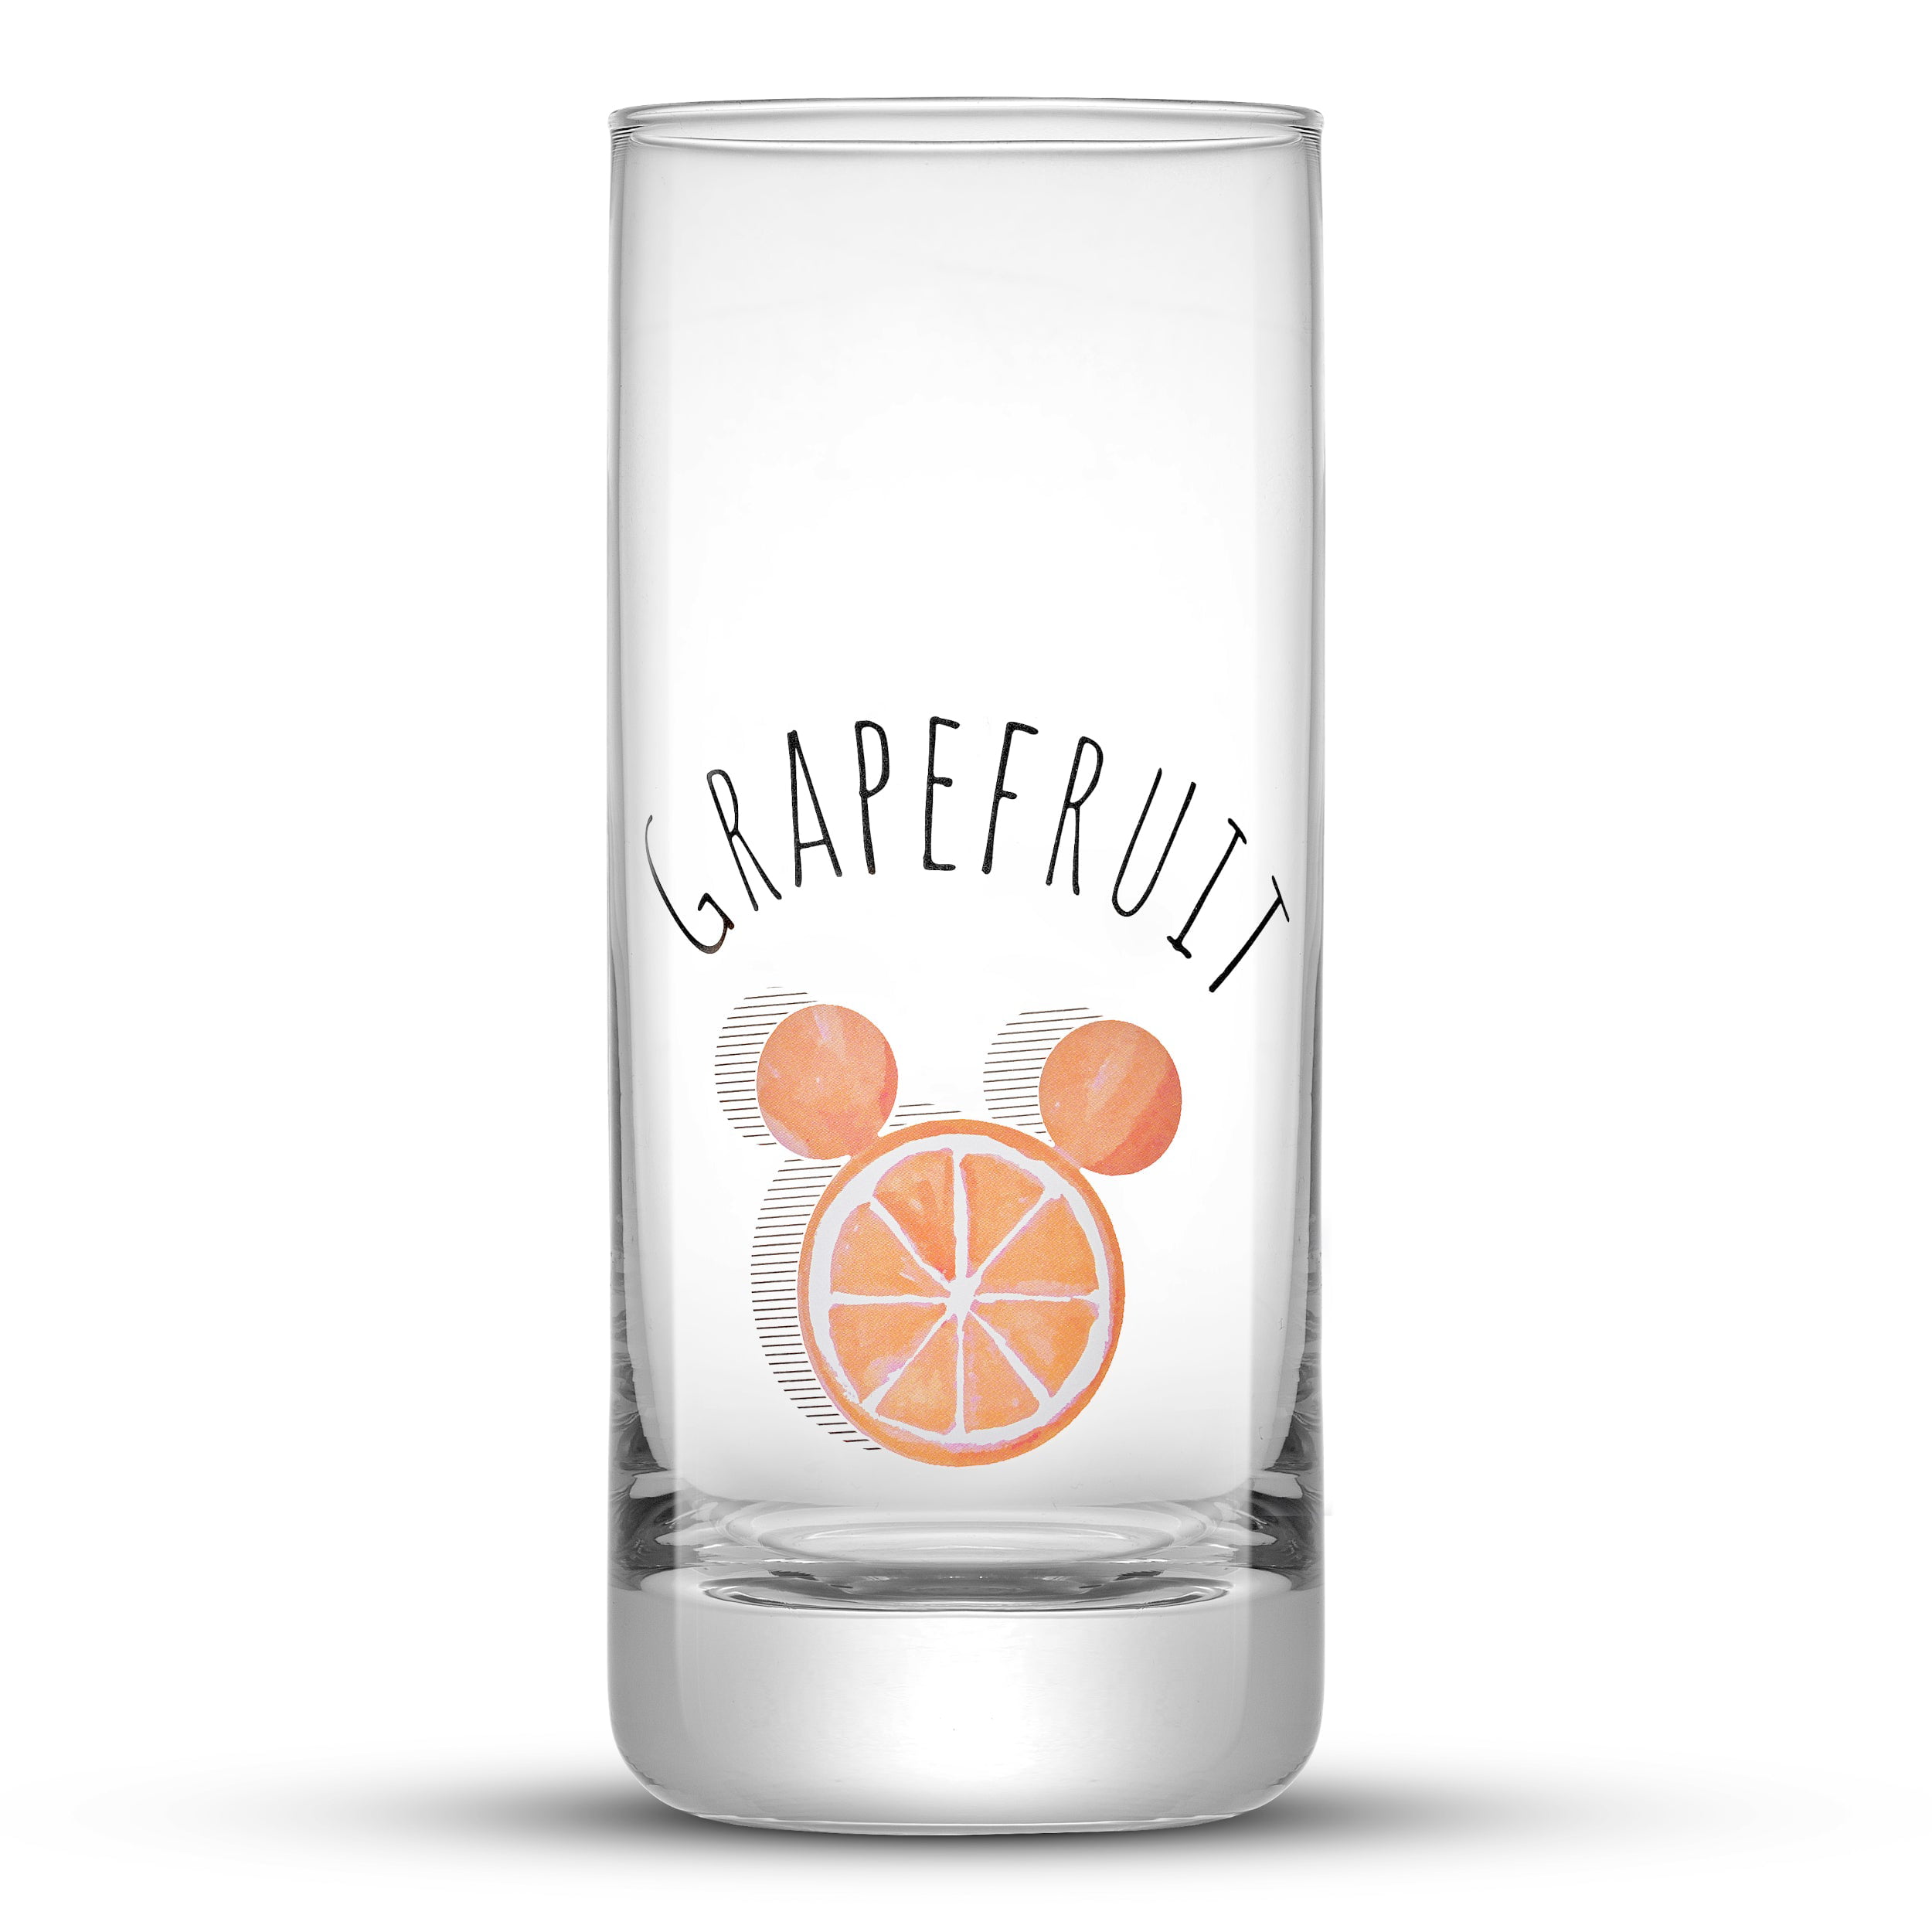 Mickey and Friends Gardening Drinking Glasses - ID